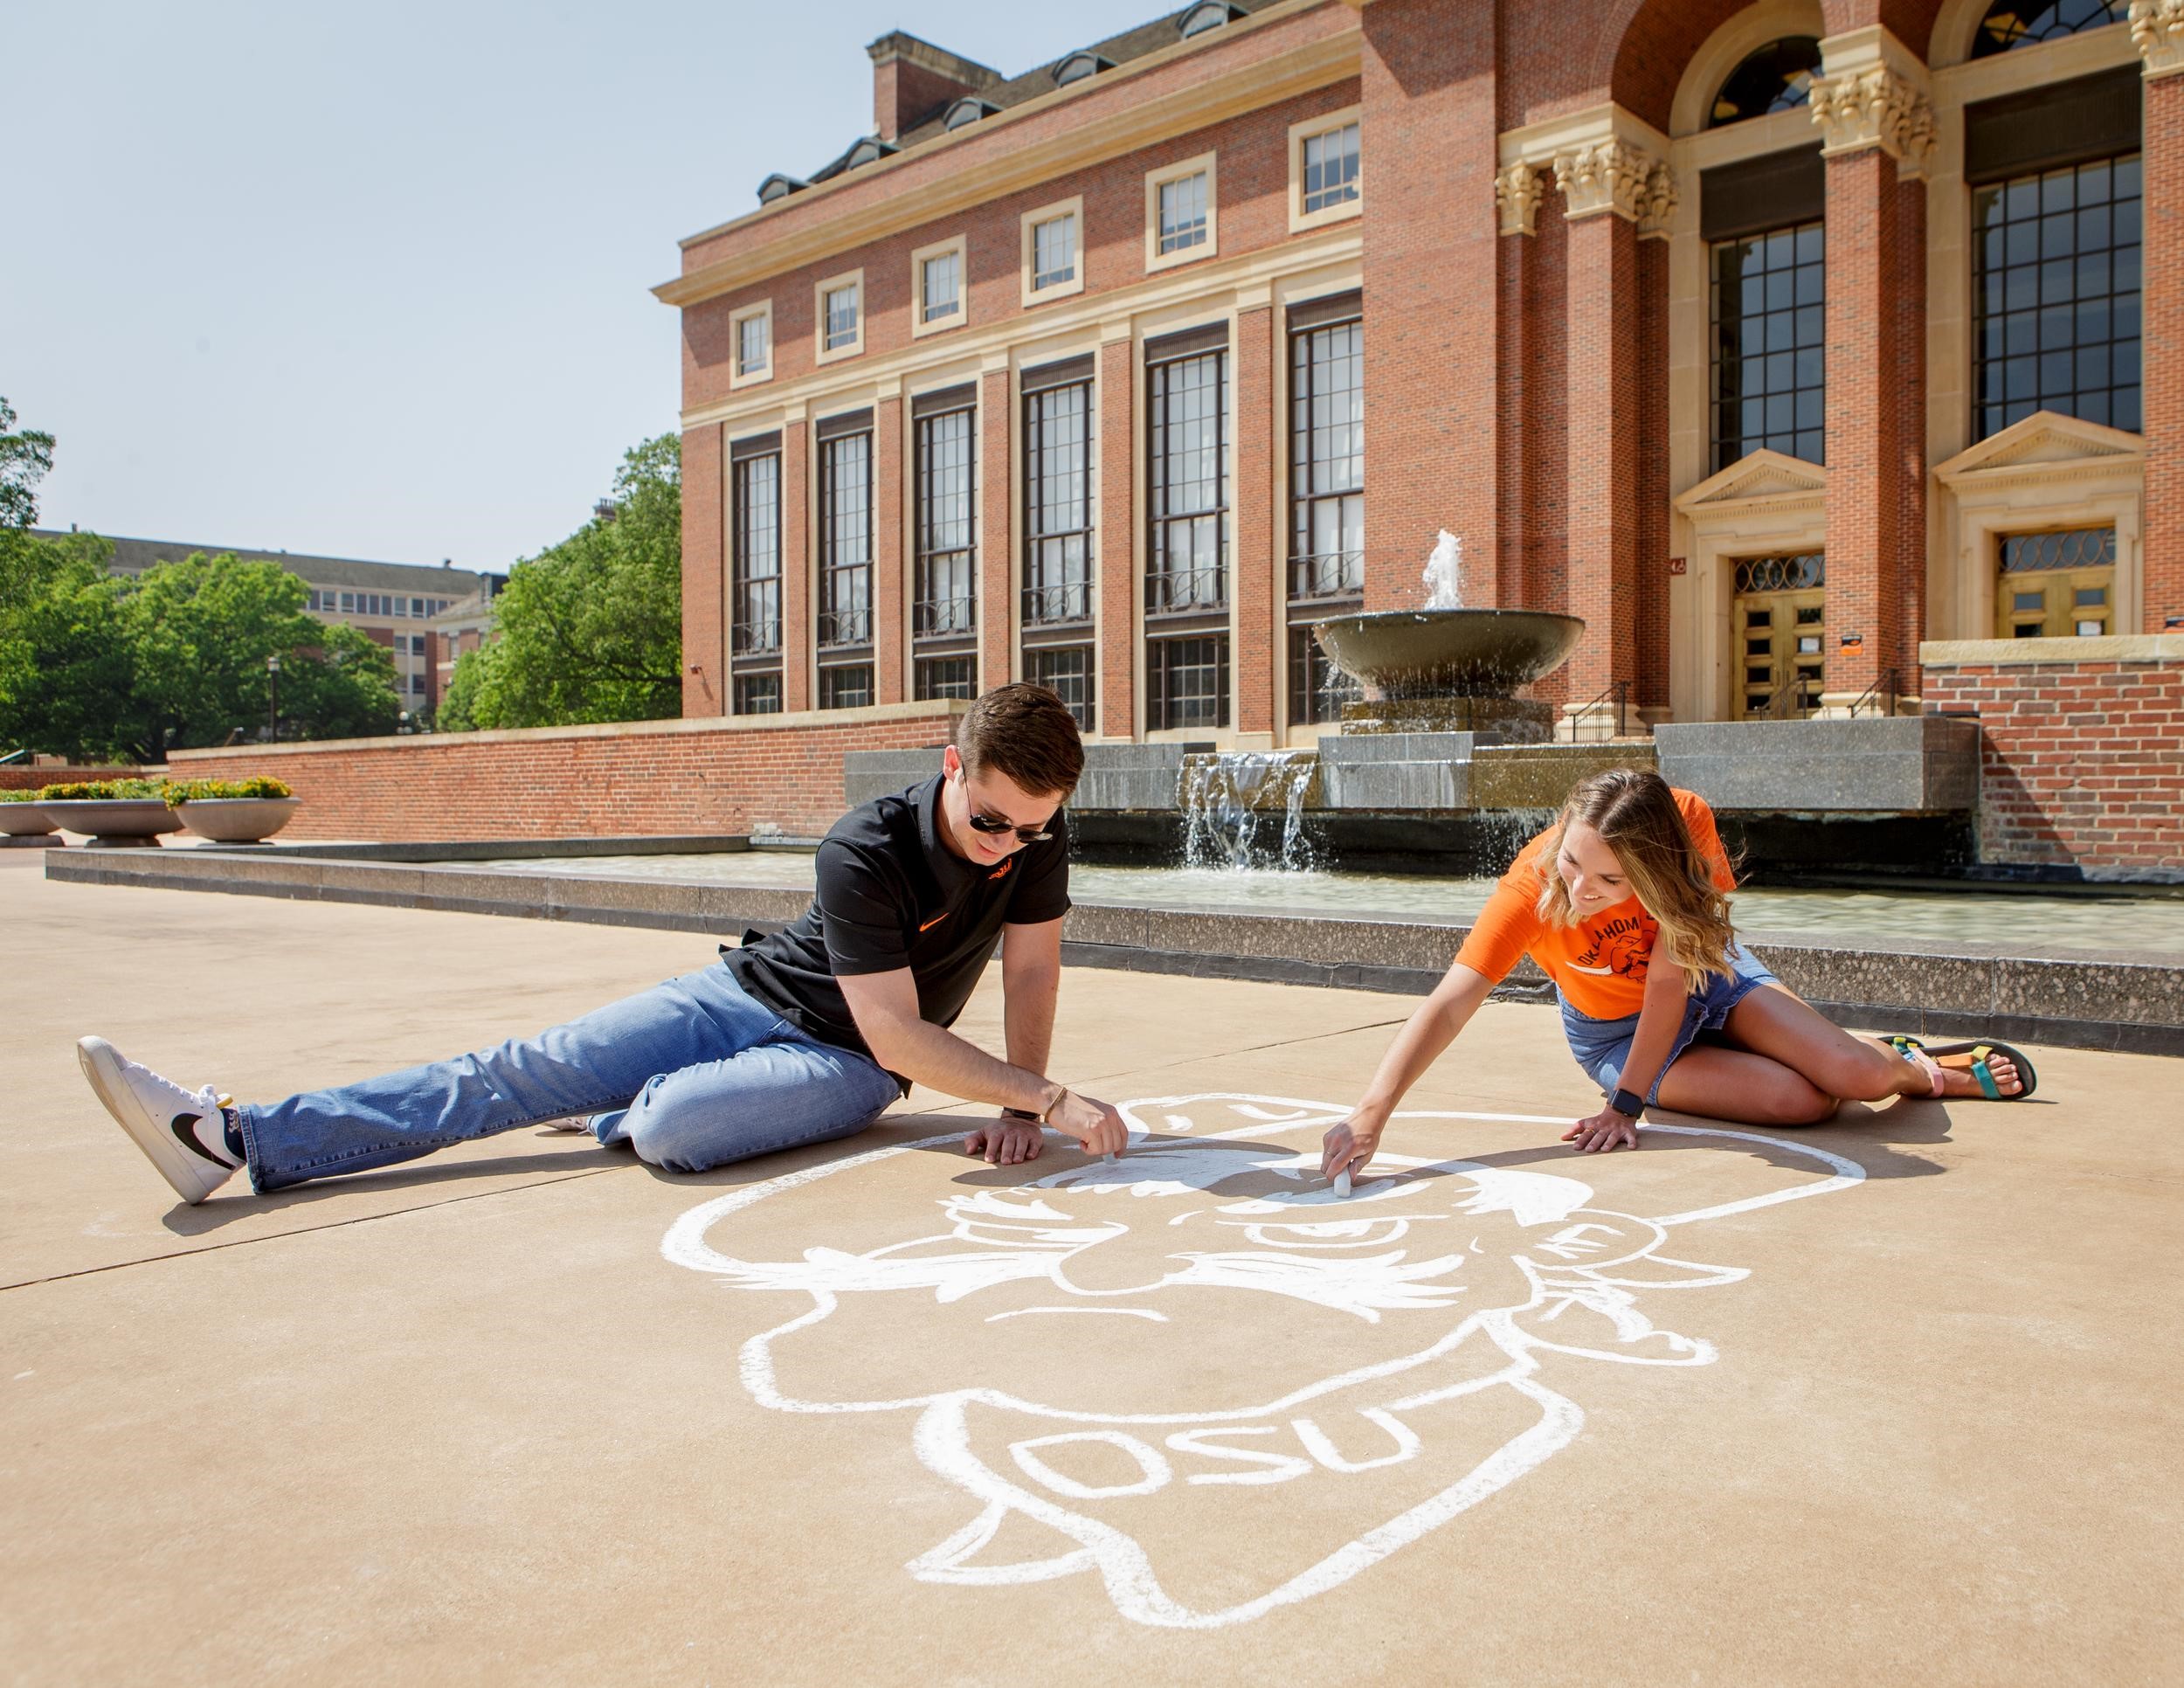 A man and a woman create a chalk drawing of Pistol Pete's head in front of the fountain at Edmon Low Library.